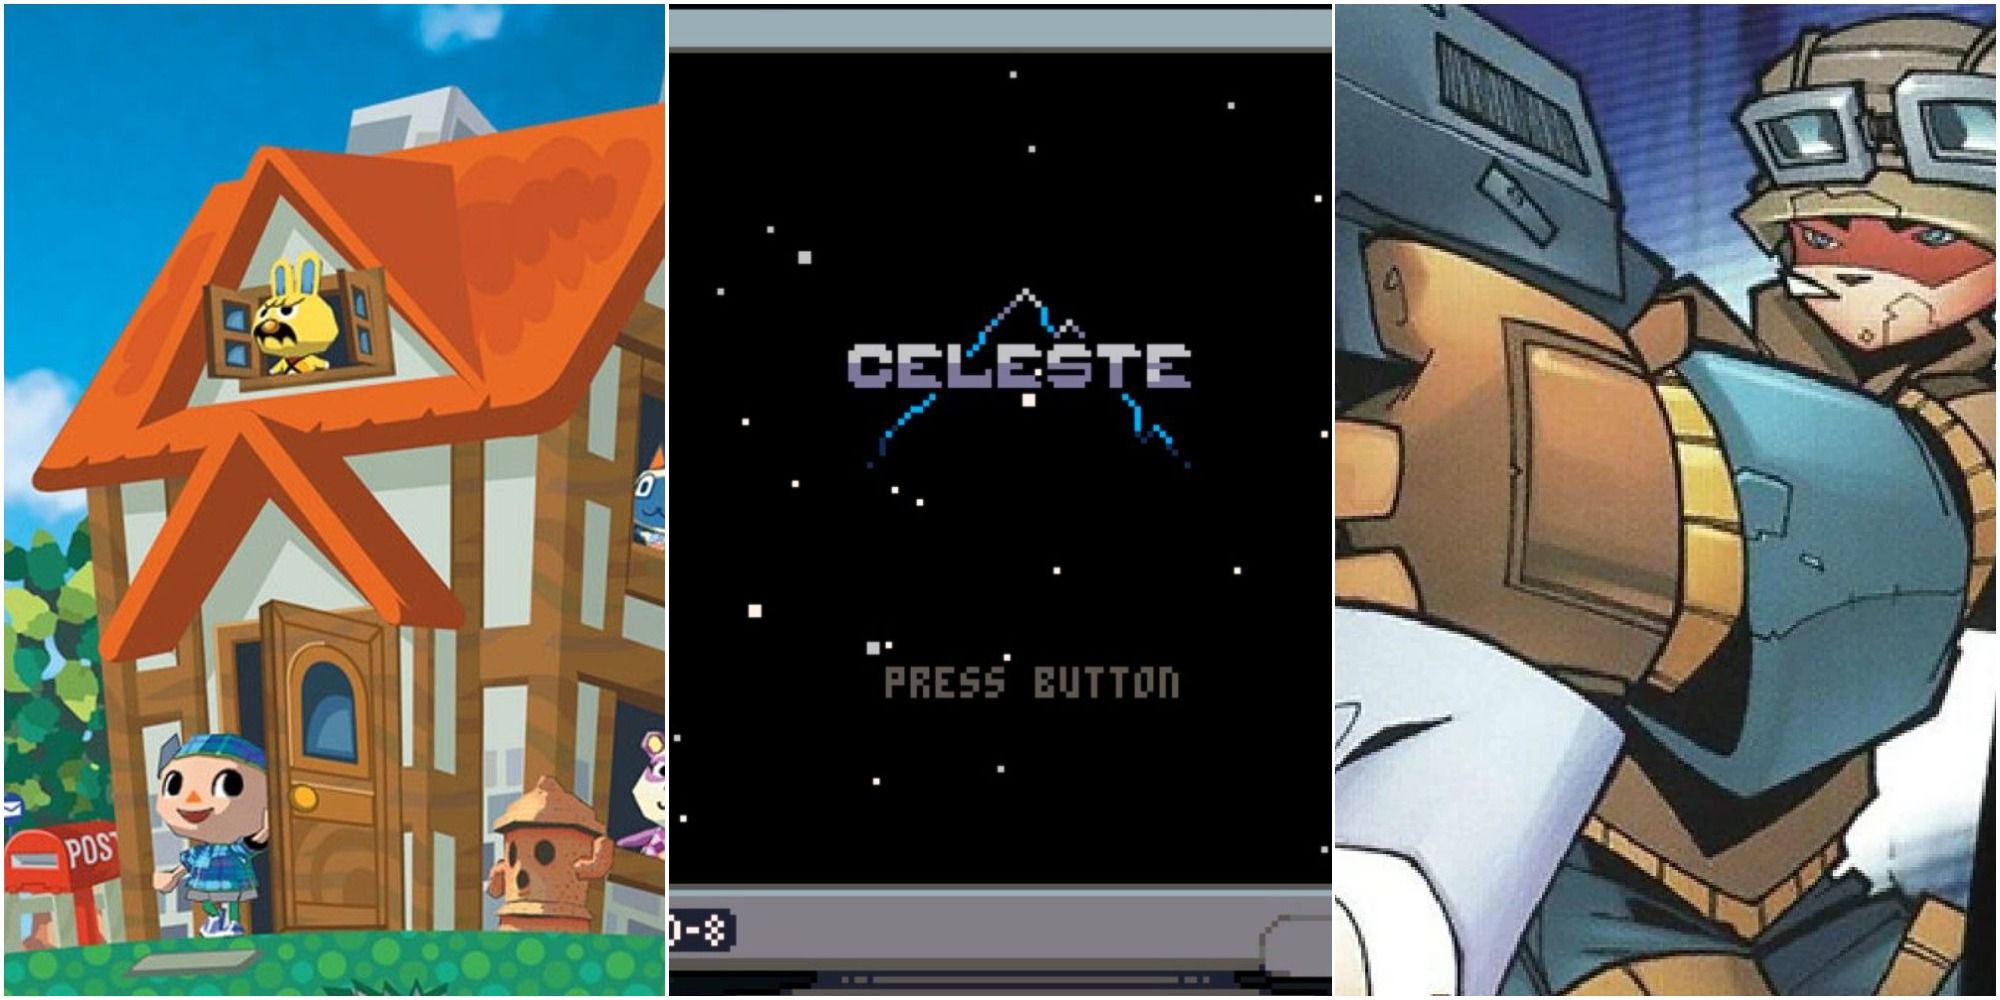 A house with multiple residents from Animal Crossing, Celeste Classic within Celeste, and the Timesplitters 2 promo art, left to right